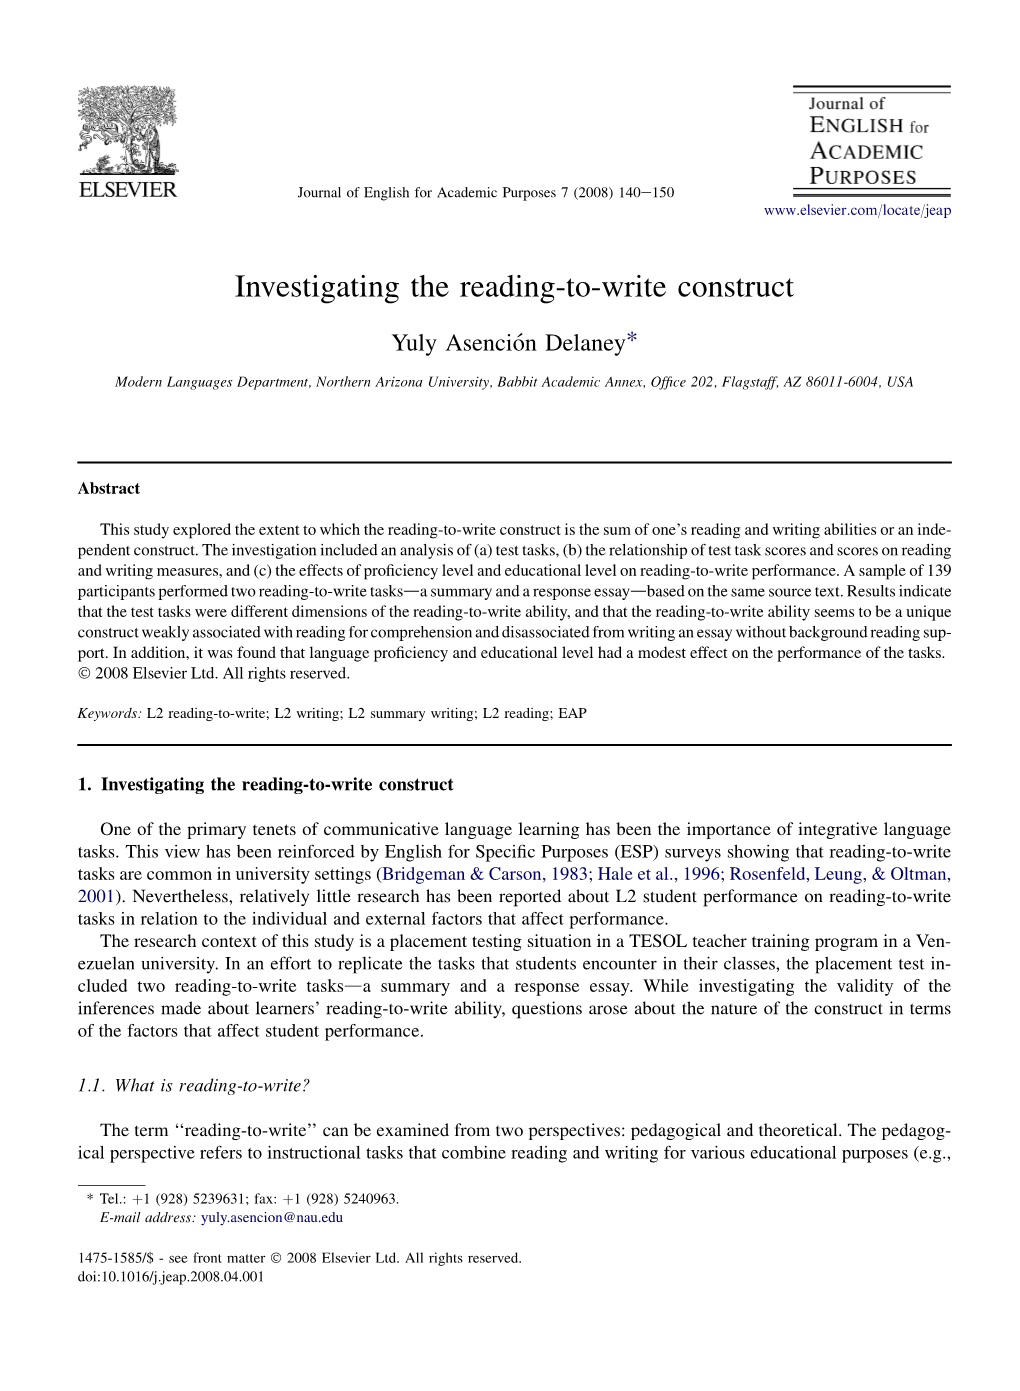 Investigating the Reading-To-Write Construct